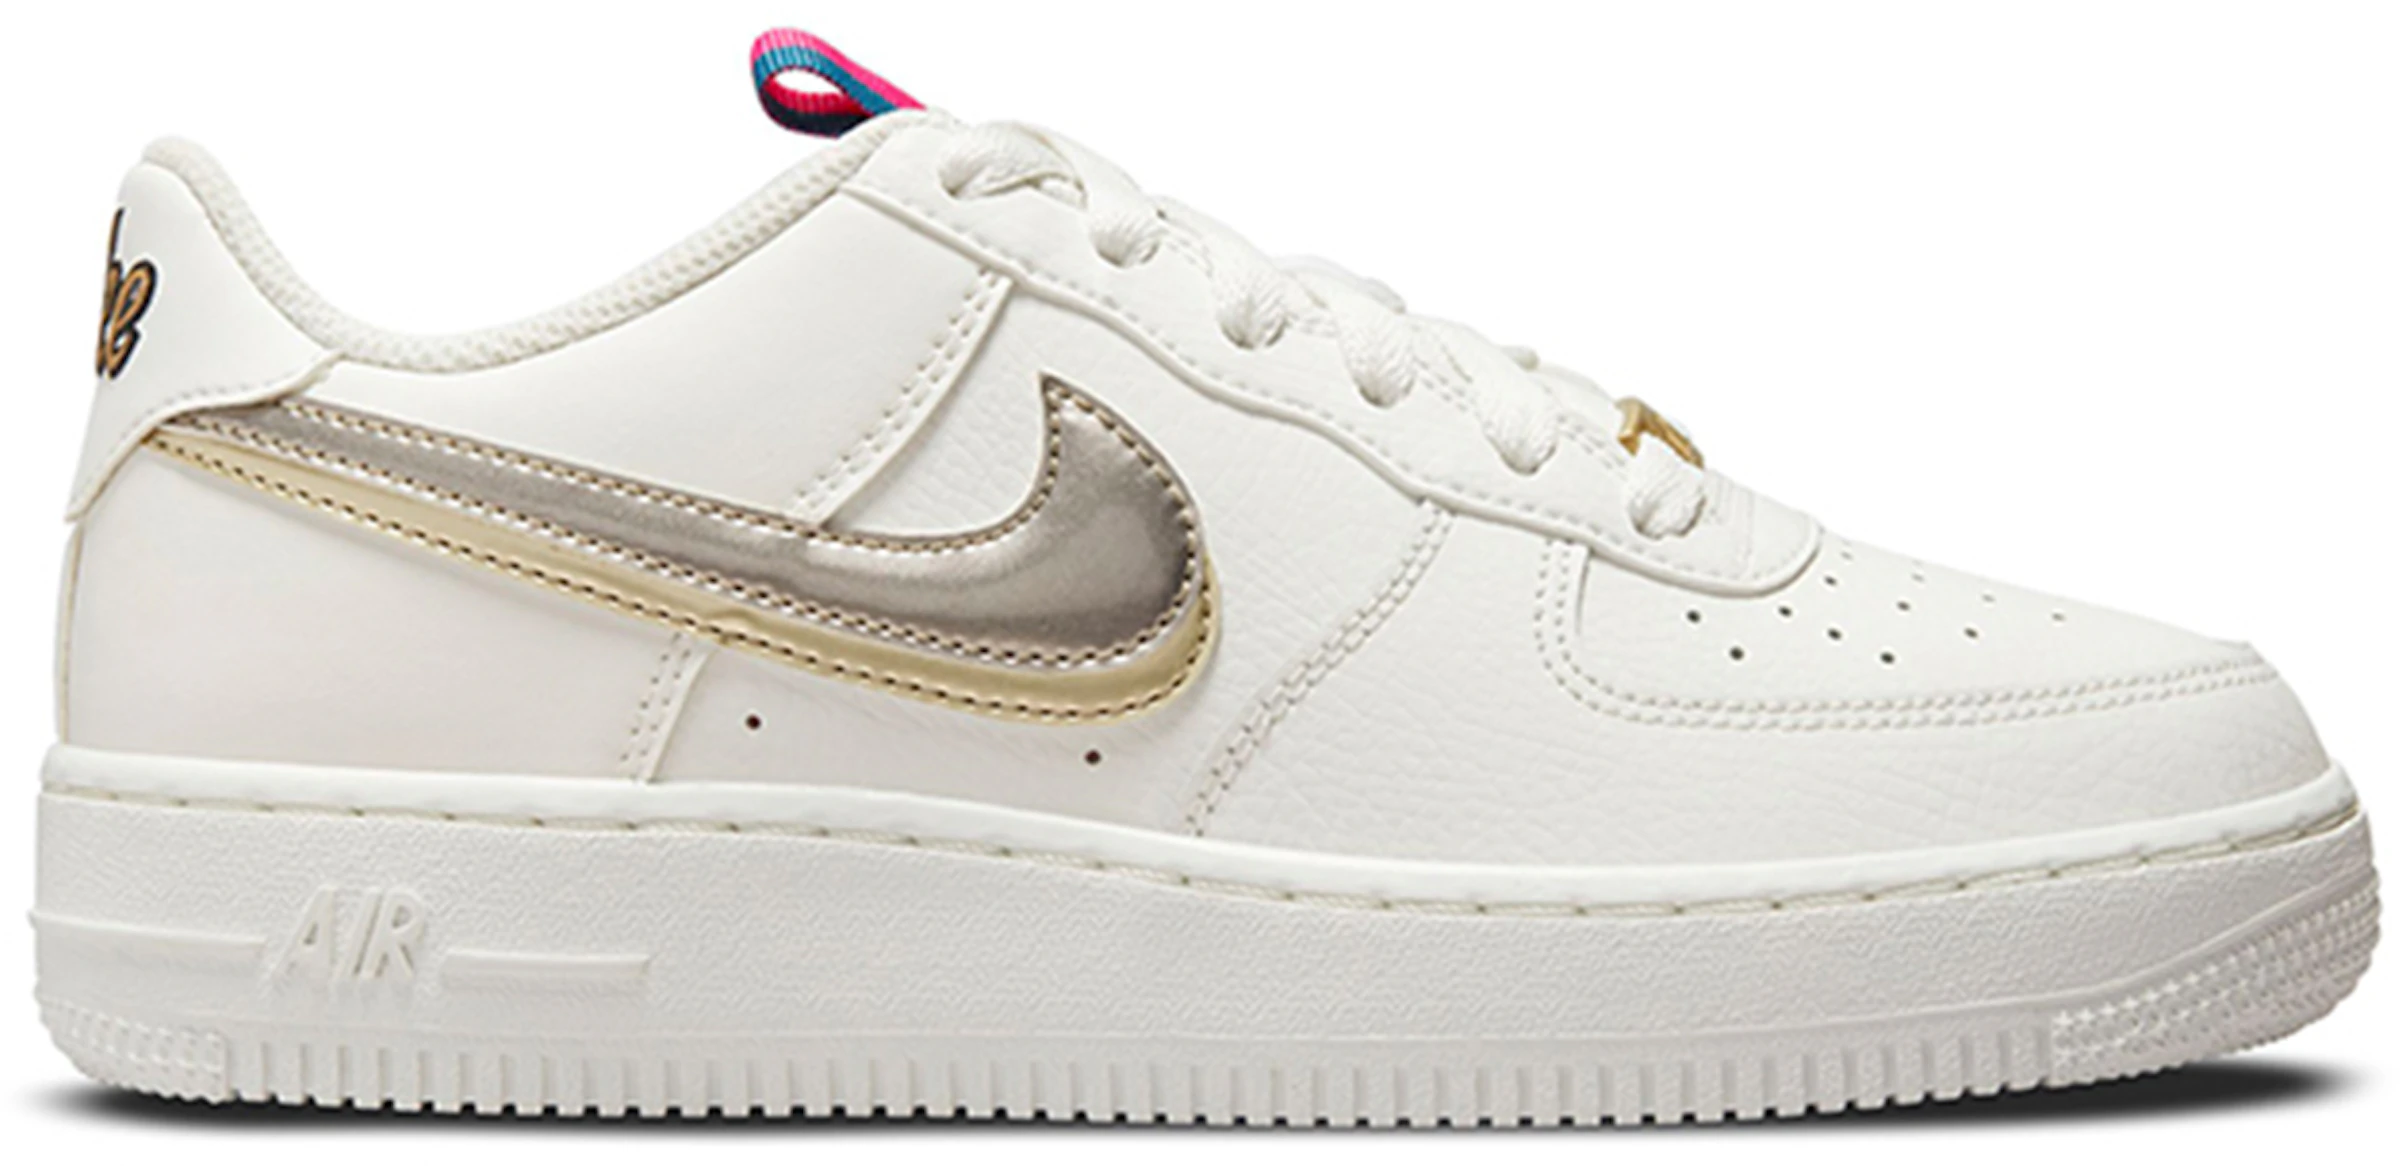 Nike Air Force LV8 Double Swoosh Silver Gold (GS) - DH9595-001 - ES